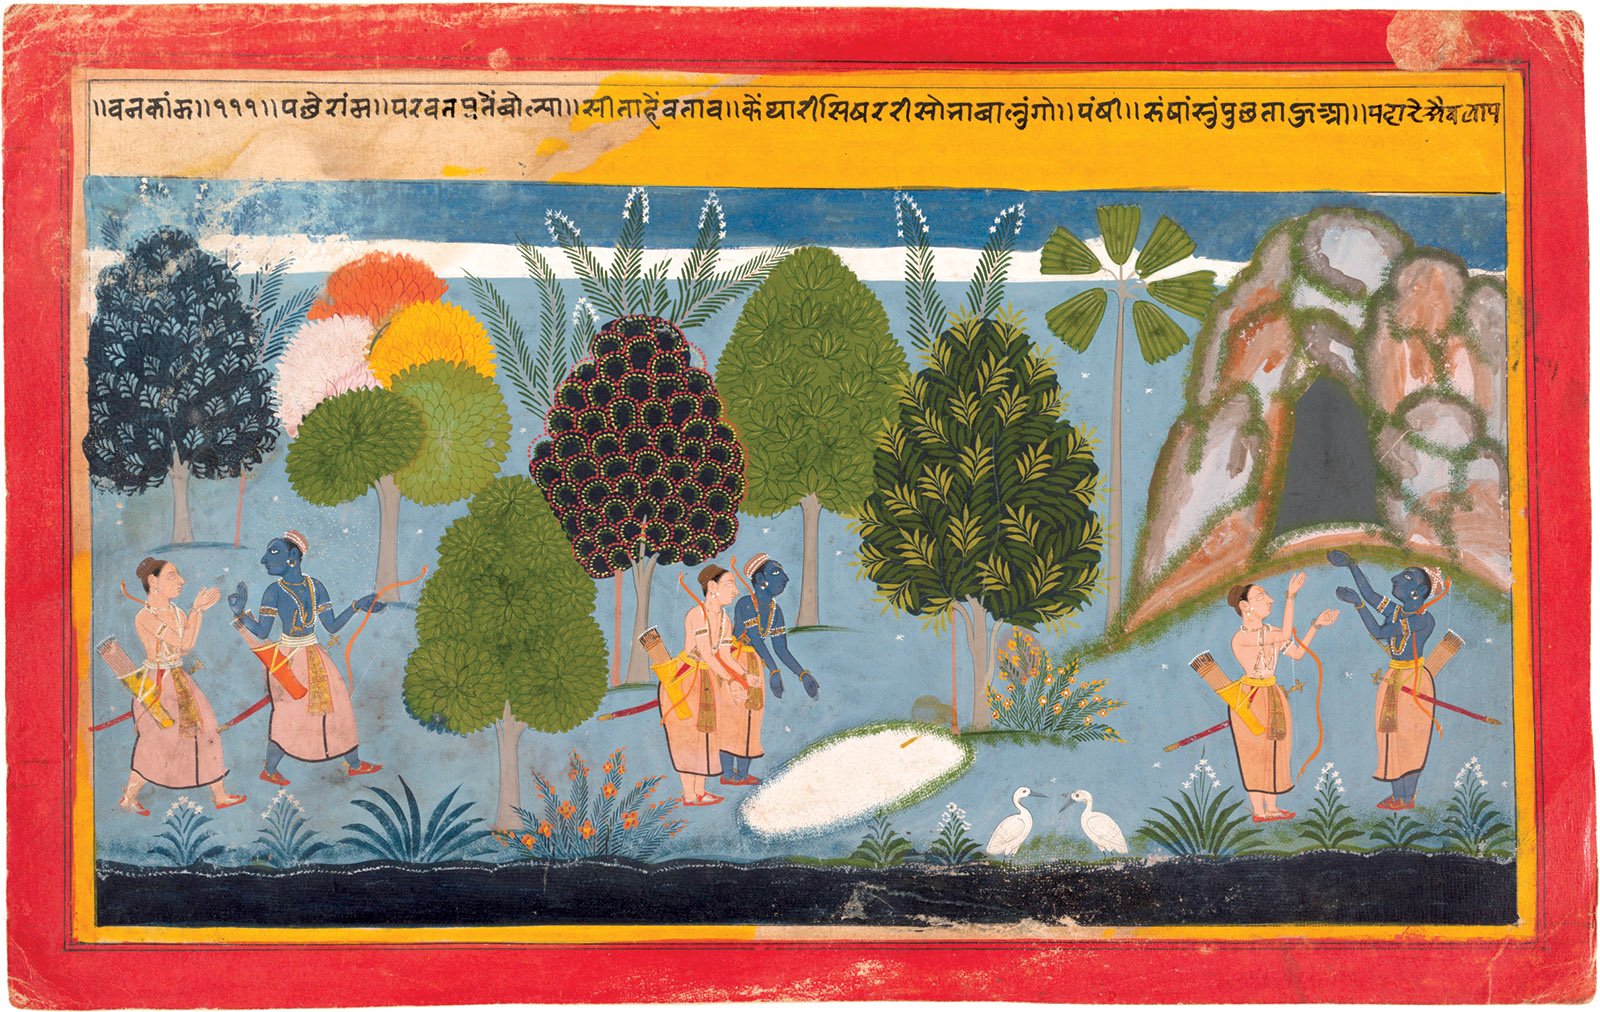 Rama and Lakshmana searching for Sita; illustration from the Ramayana, Rajasthan, India